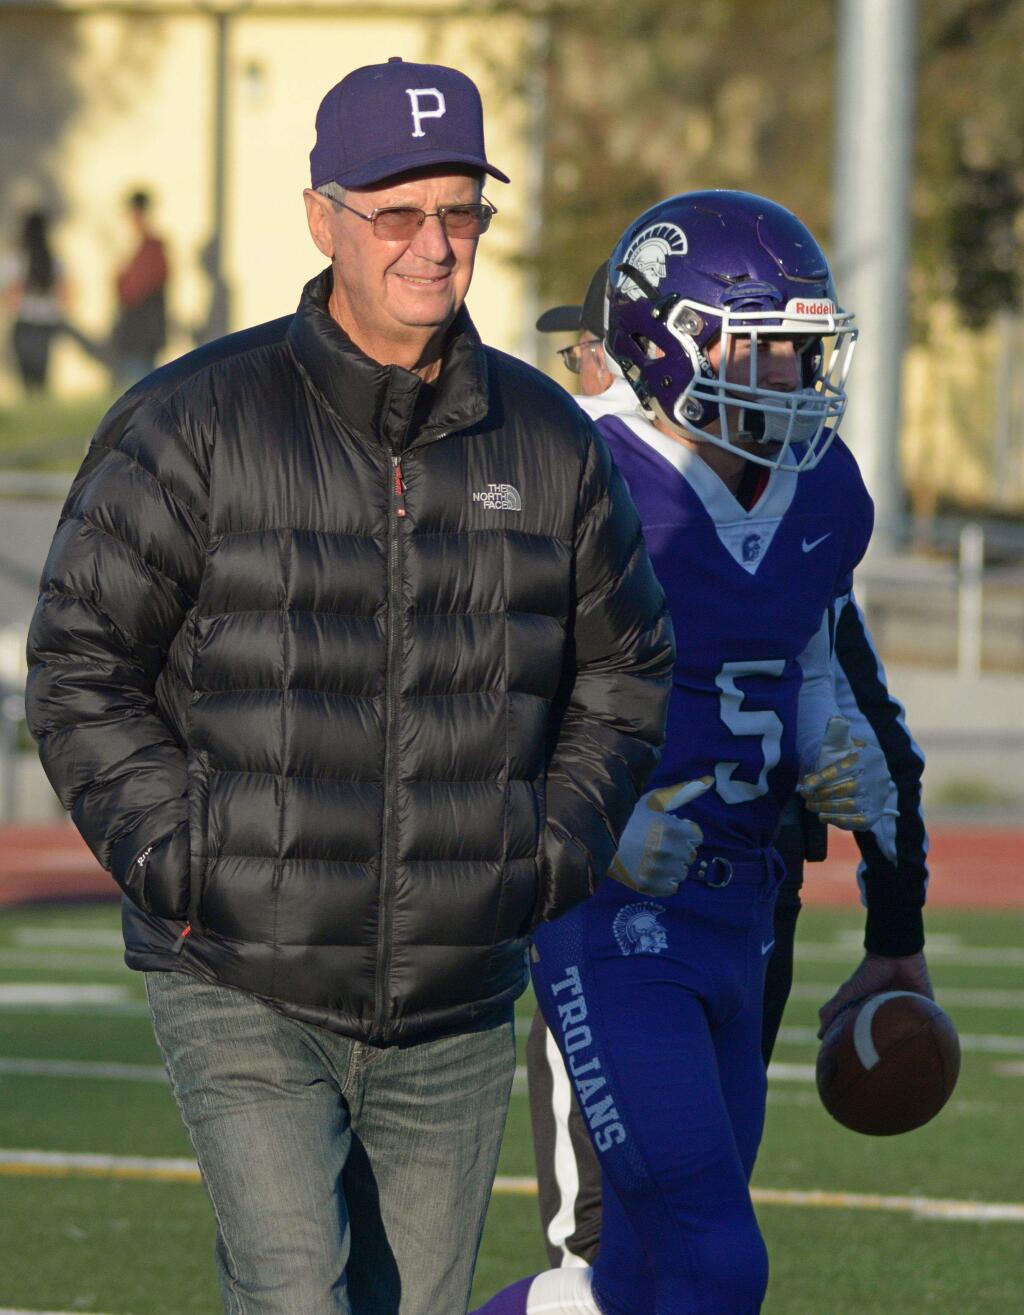 SUMNER FOWLER/FOR THE ARGUS-COURIERFormer Petaluma High football coach Steve Ellison is escorted onto the field by Trojan running back Garrett Fraites for the coin flip prior to the first football game played on the newly refurbished Steve Ellison Field.